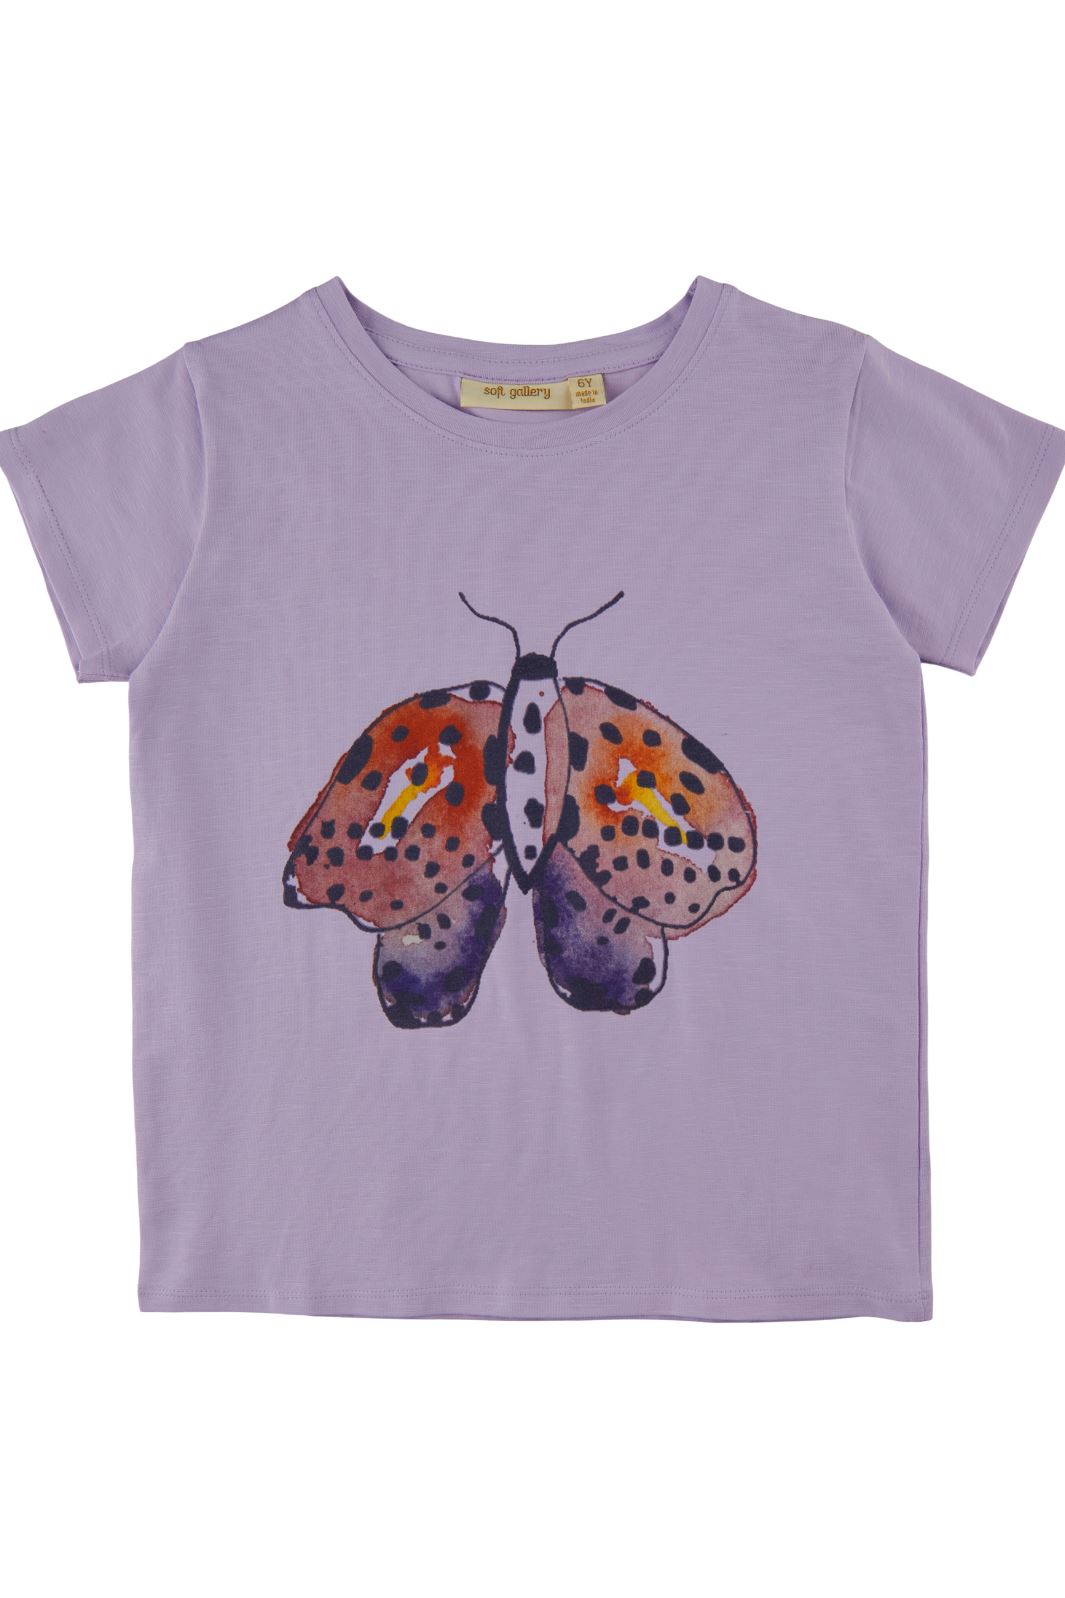 Soft Gallery - SGPilou Garden Swarm SS Tee - Pastel Lilac T-shirts 